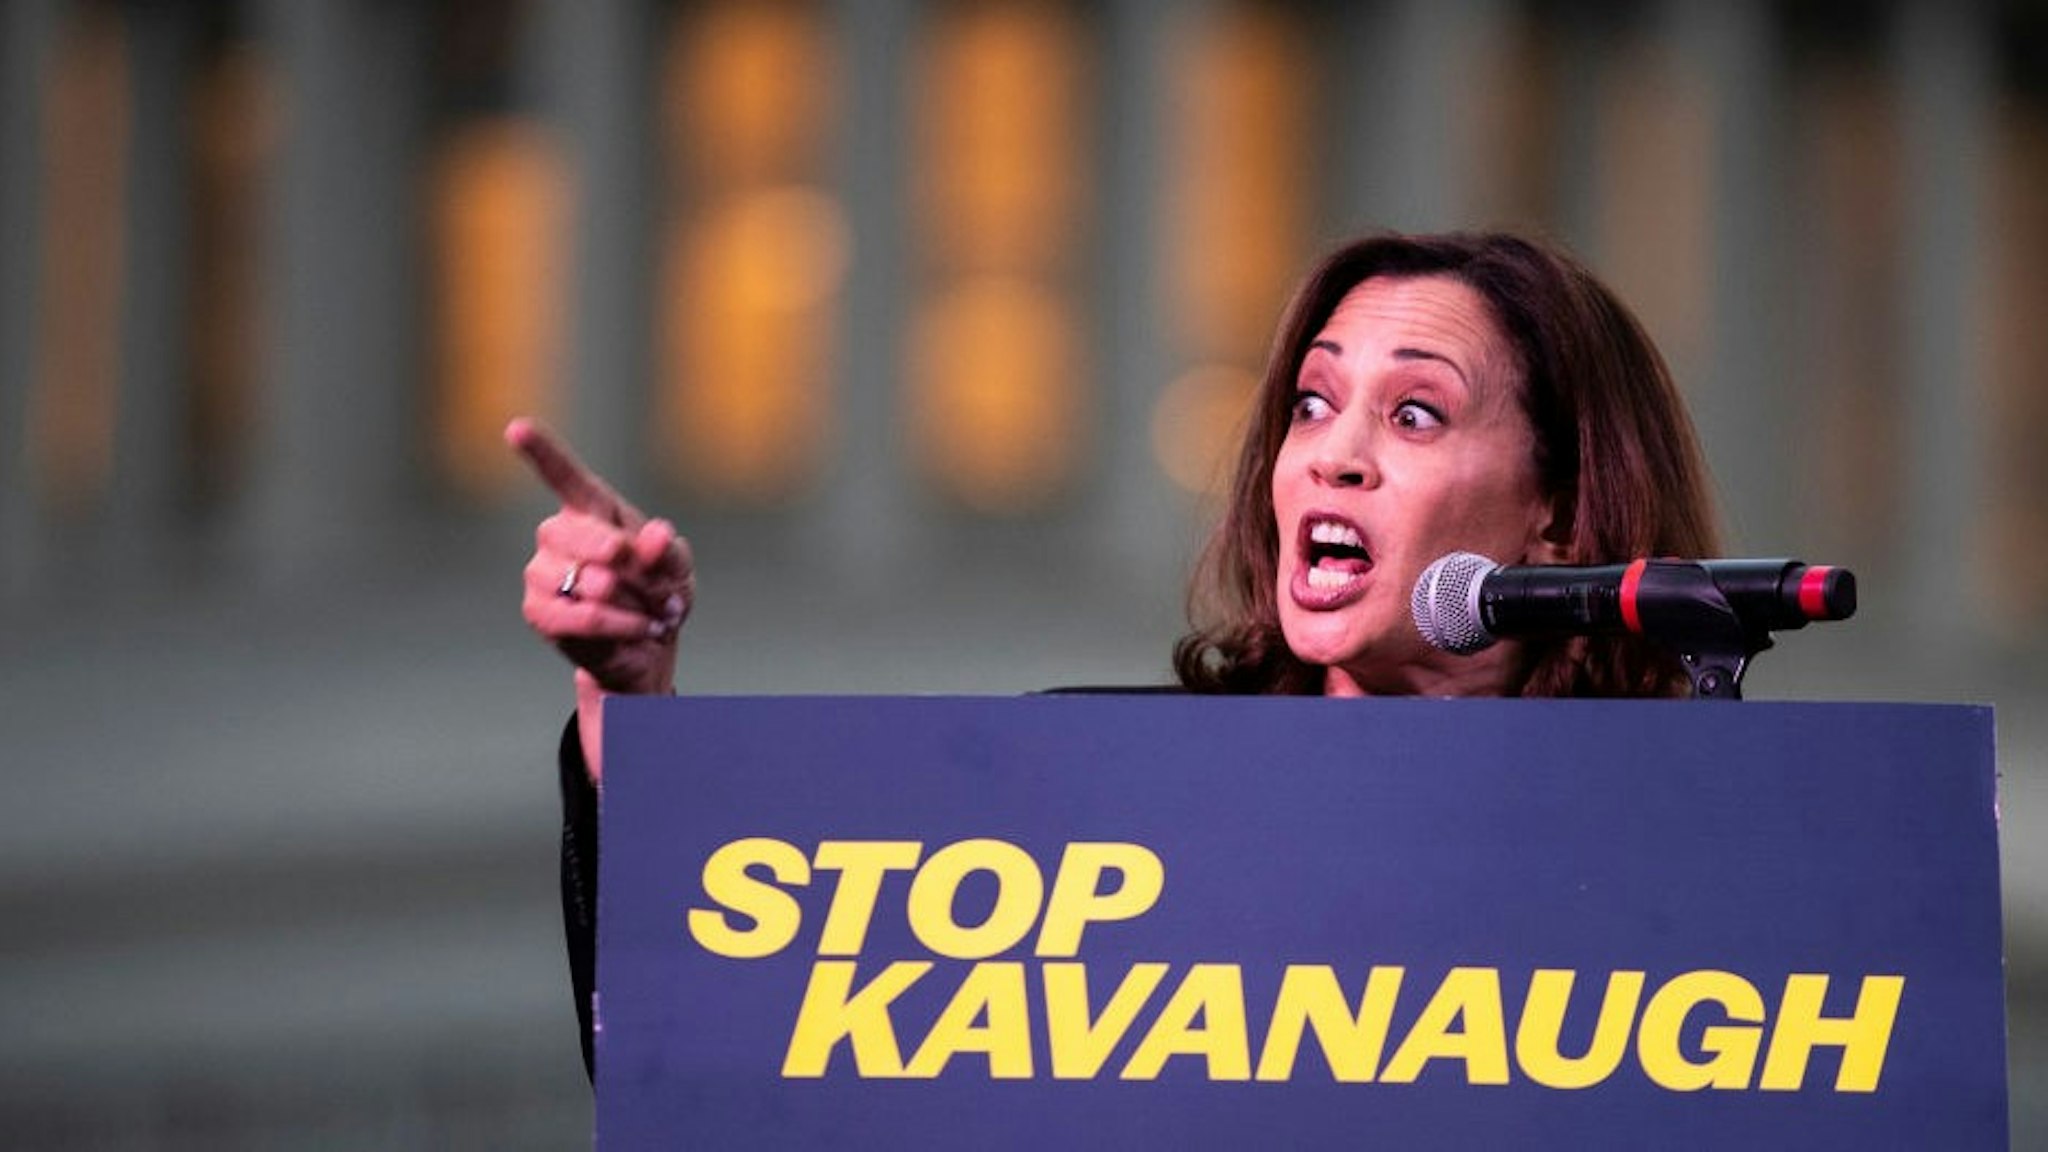 WASHINGTON, DC - OCTOBER 4: U.S. Sen. Kamala Harris (D-CA) speaks to protestors rallying against Supreme Court nominee Judge Brett Kavanaugh on Capitol Hill, October 4, 2018 in Washington, DC. Kavanaugh's confirmation process was halted for less than a week so that FBI investigators could look into allegations by Dr. Christine Blasey Ford, a California professor who who has accused Kavanaugh of sexually assaulting her during a party in 1982 when they were high school students in suburban Maryland. (Photo by